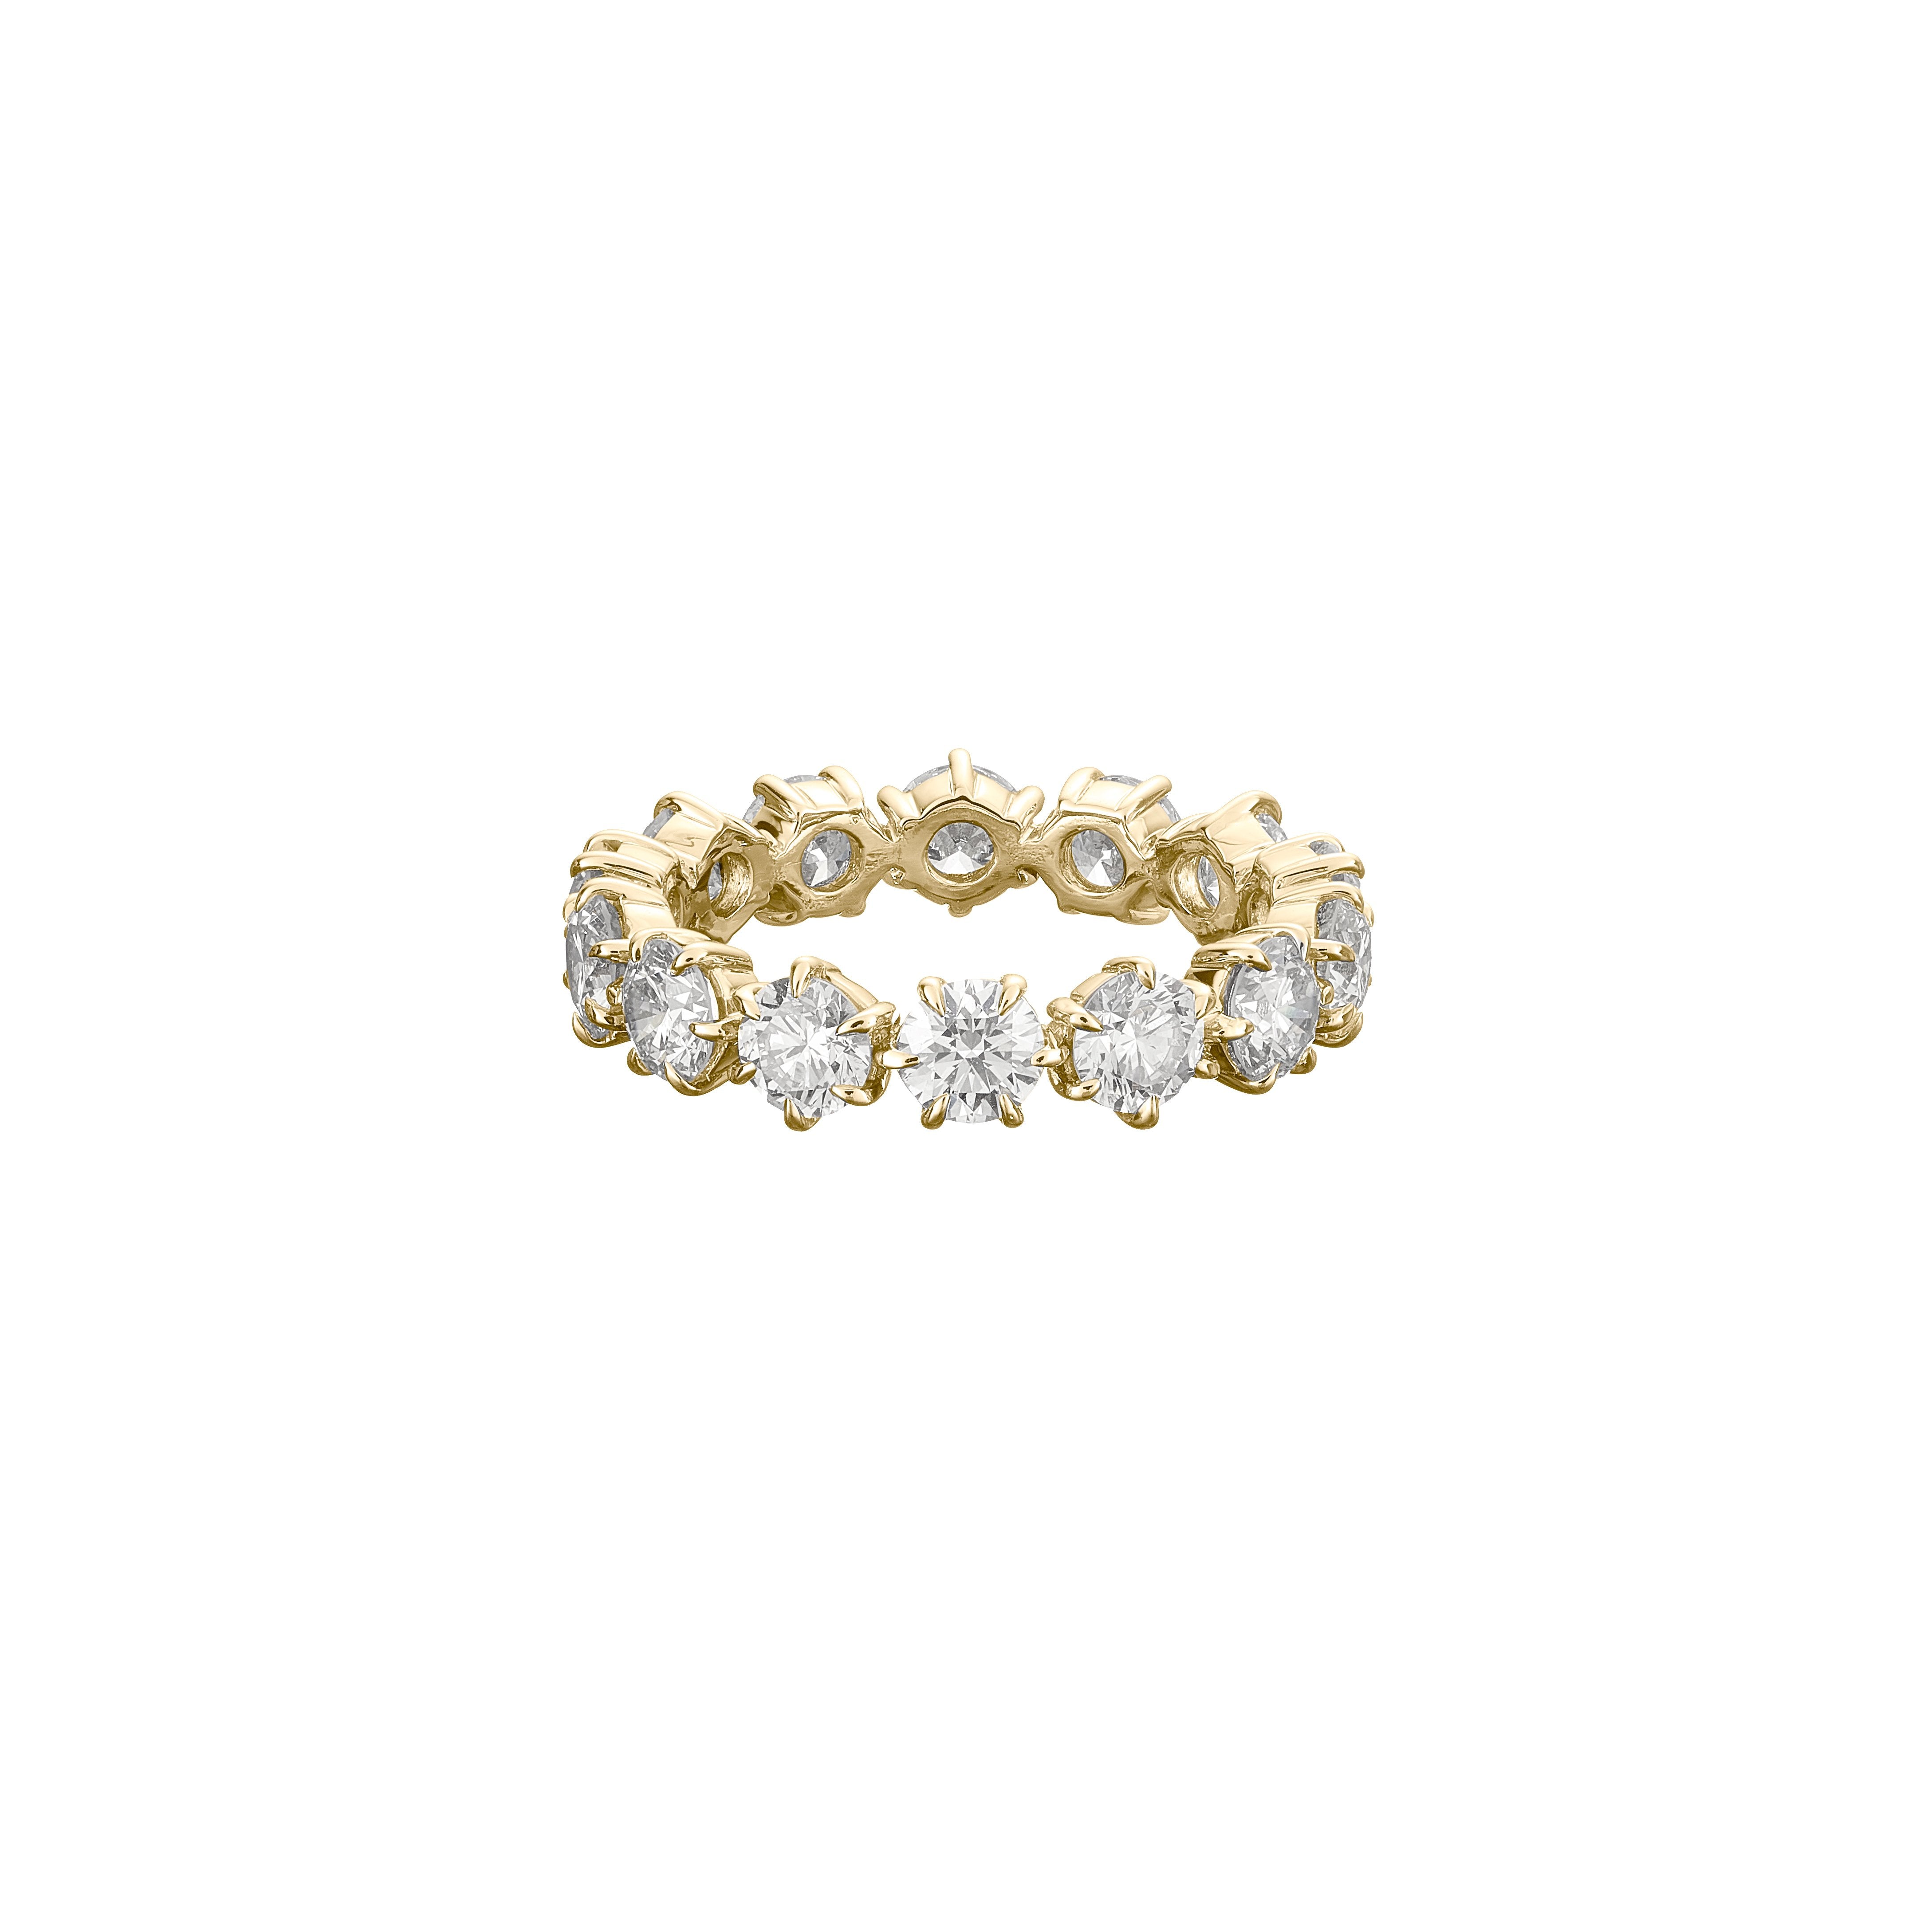 Catherine Eternity No. 4 in 18K Yellow Gold